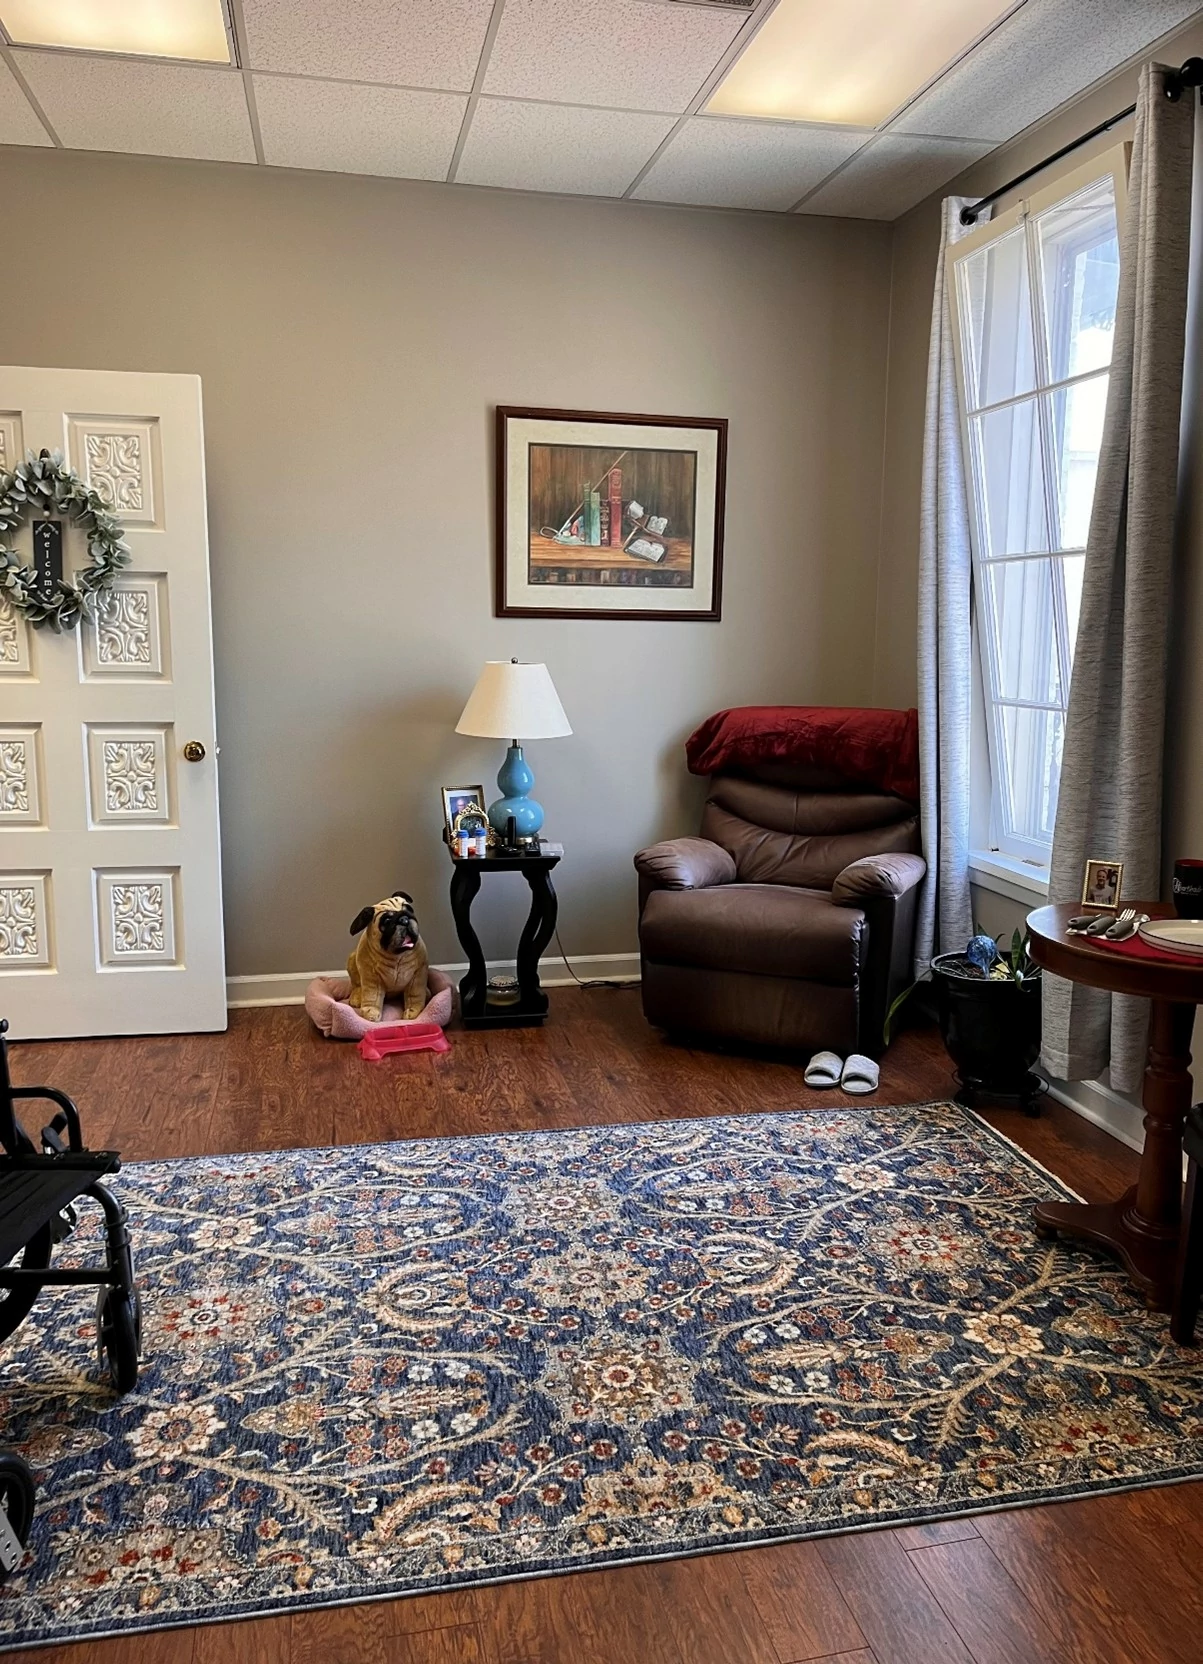 As you enter the studio apartment, you will be in the living space complete with a lift chair, Buddy the dog, and various fall risks.  To the right of the window, is a small kitchen table set with weighted utensils and other items to aid in training.